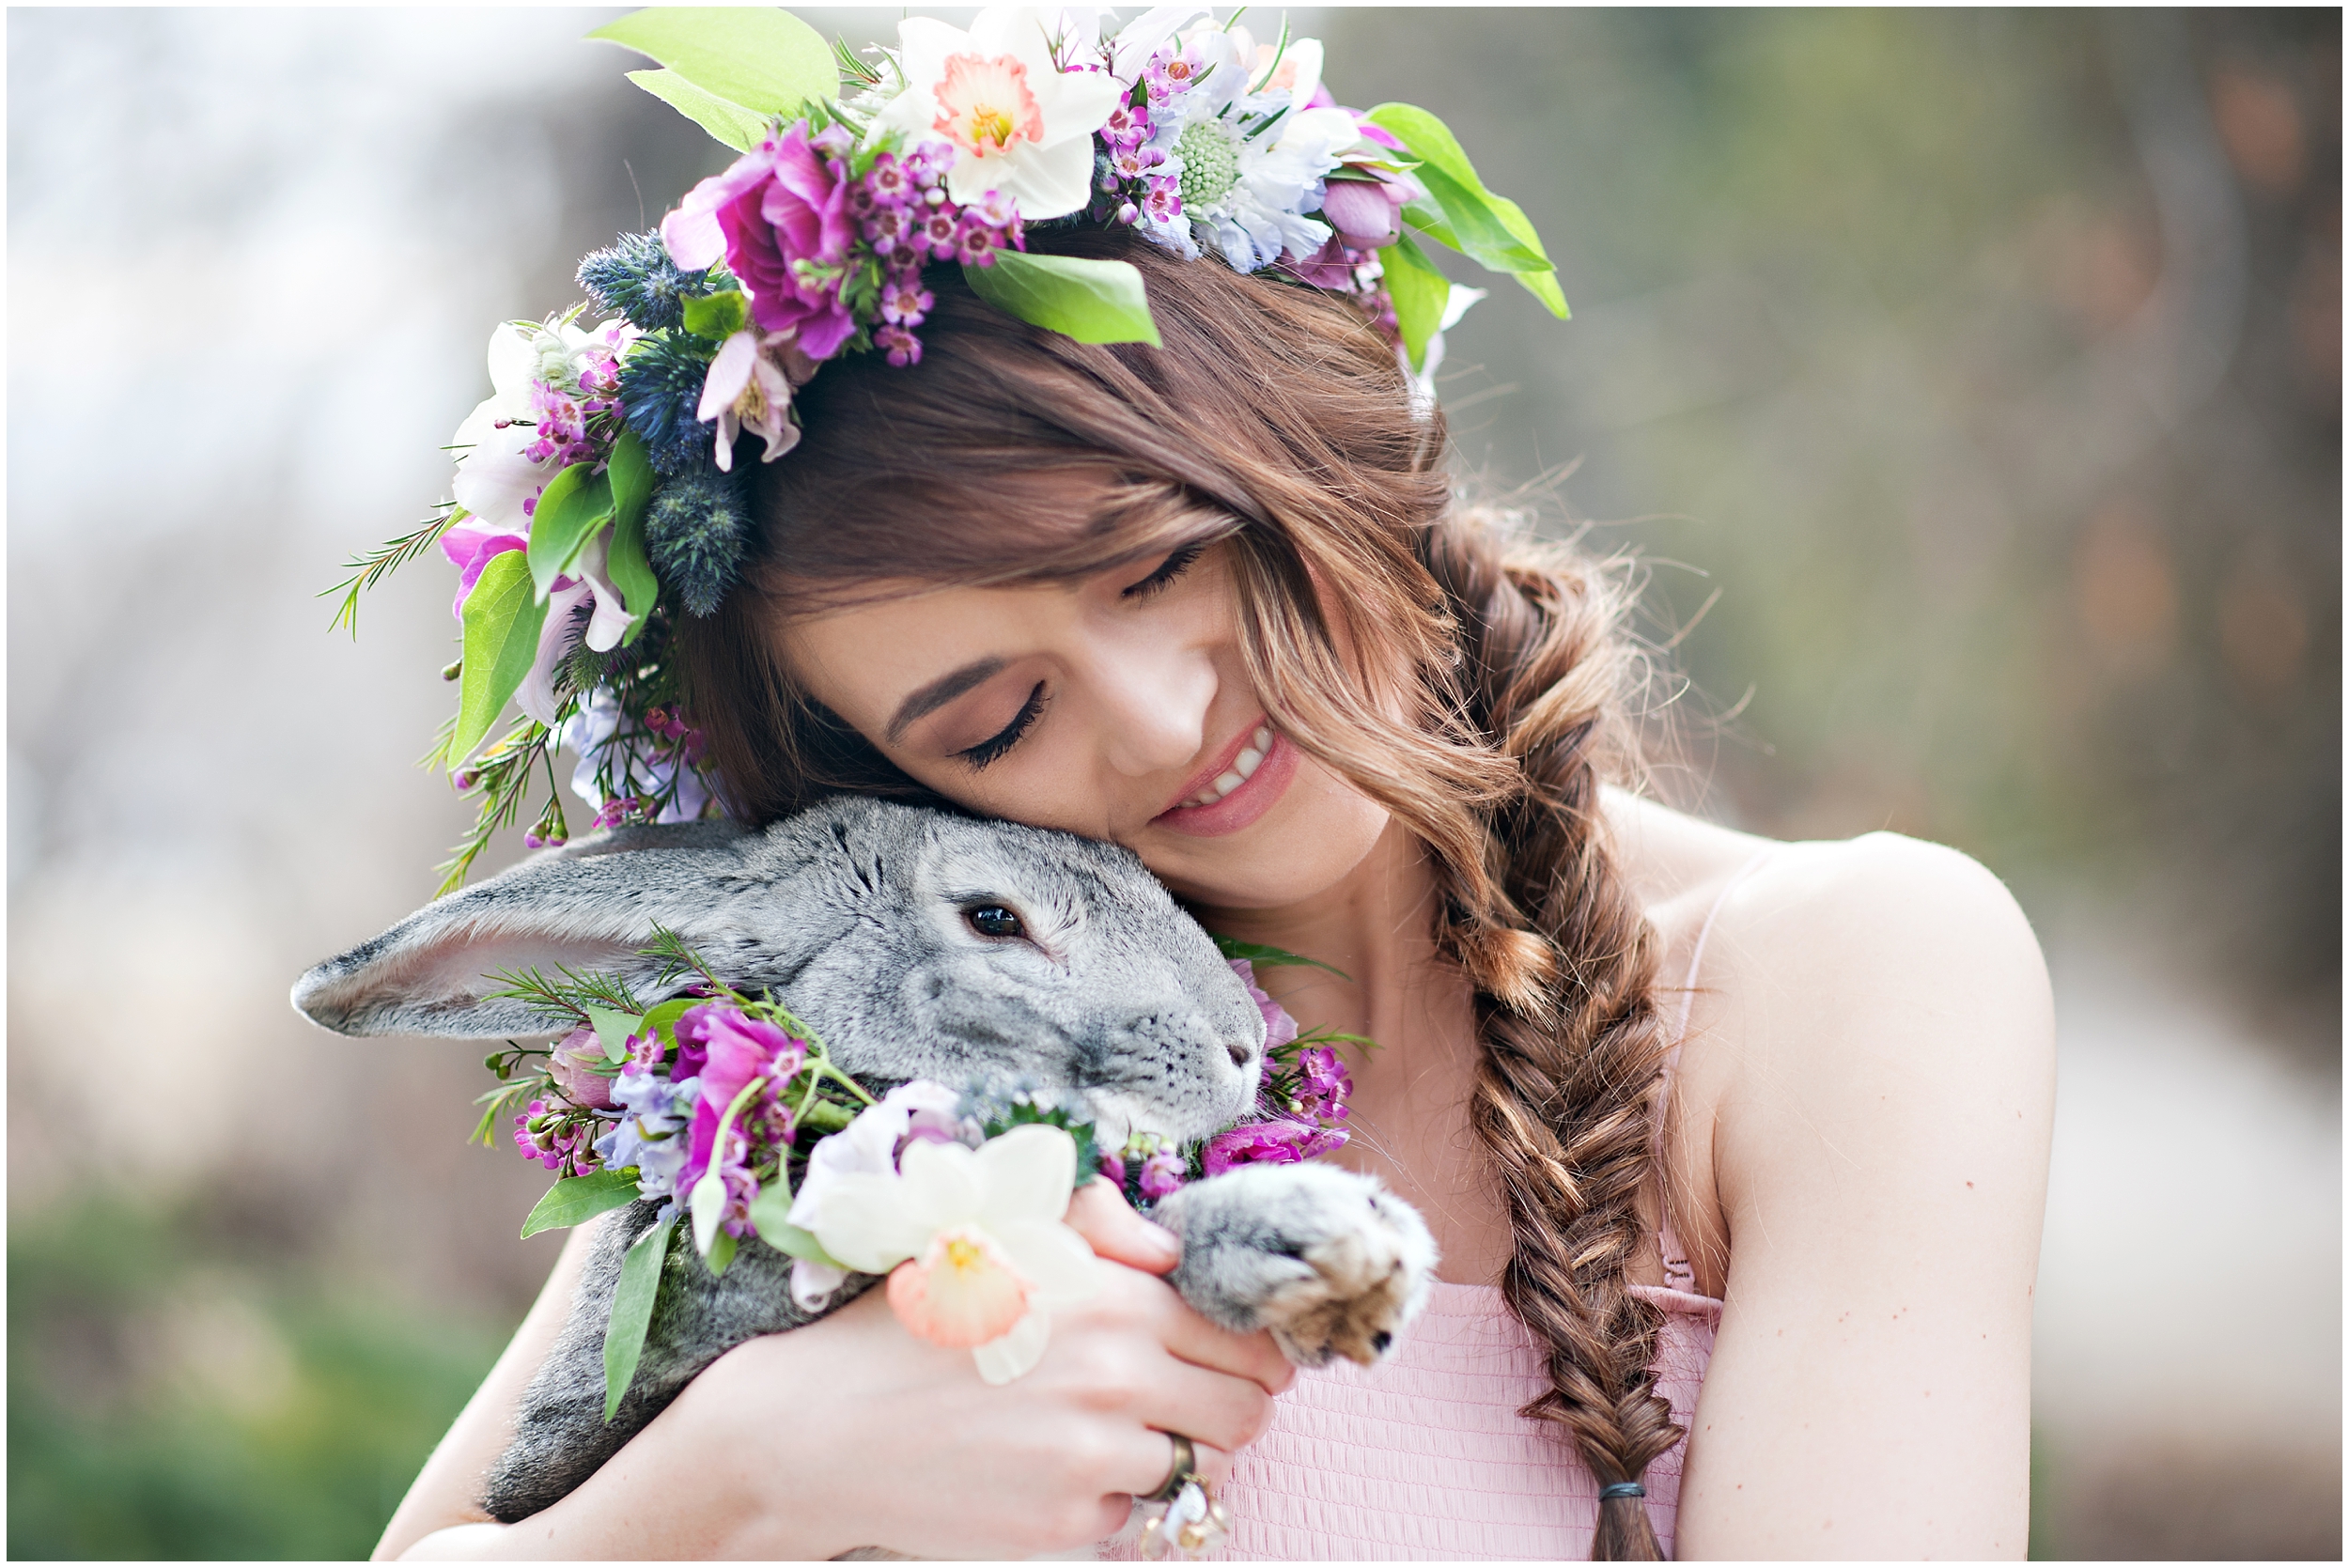 Spring bridal, bunny halo, floral halo, spring blooms, Calie rose flowers, whimsical bridals, Easter bunny, Utah wedding photographers, Utah wedding photographer, Utah wedding photography, Utah county wedding photography, Utah county wedding photographer, salt lake city photographers, salt lake city wedding photography, salt lake photographers, salt lake city photographers, photographers in Utah, Utah photography, photography Utah, photographer Utah, Kristina Curtis photography, Kristina Curtis Photographer, www.kristinacurtisphotography.com